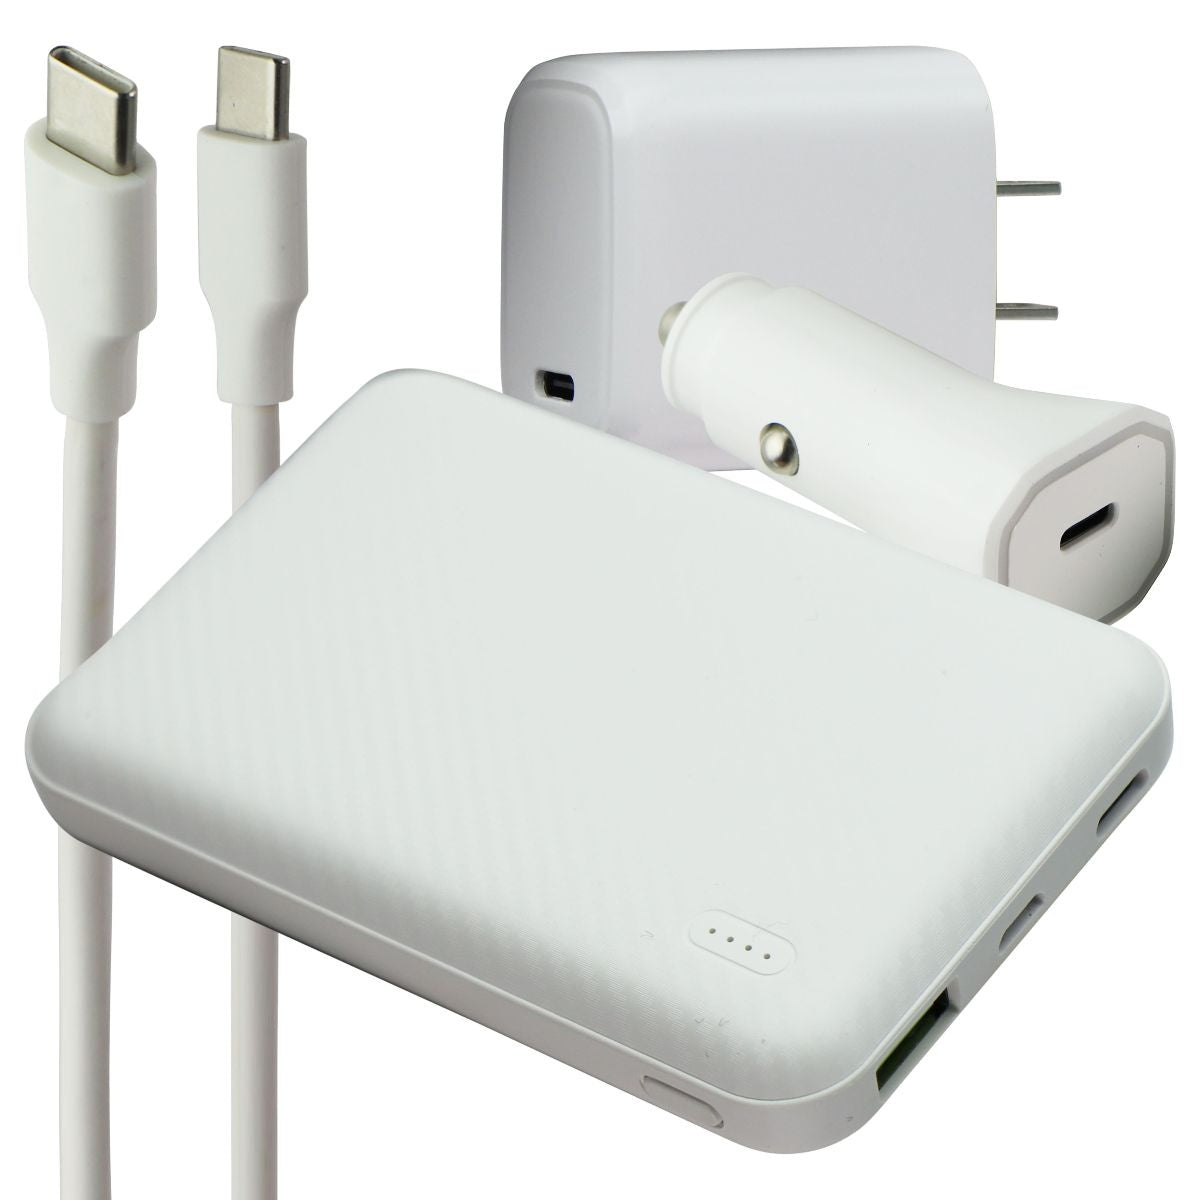 S. Simple Travel Kit USB-C On-The-Go Car and Wall Chargers - White